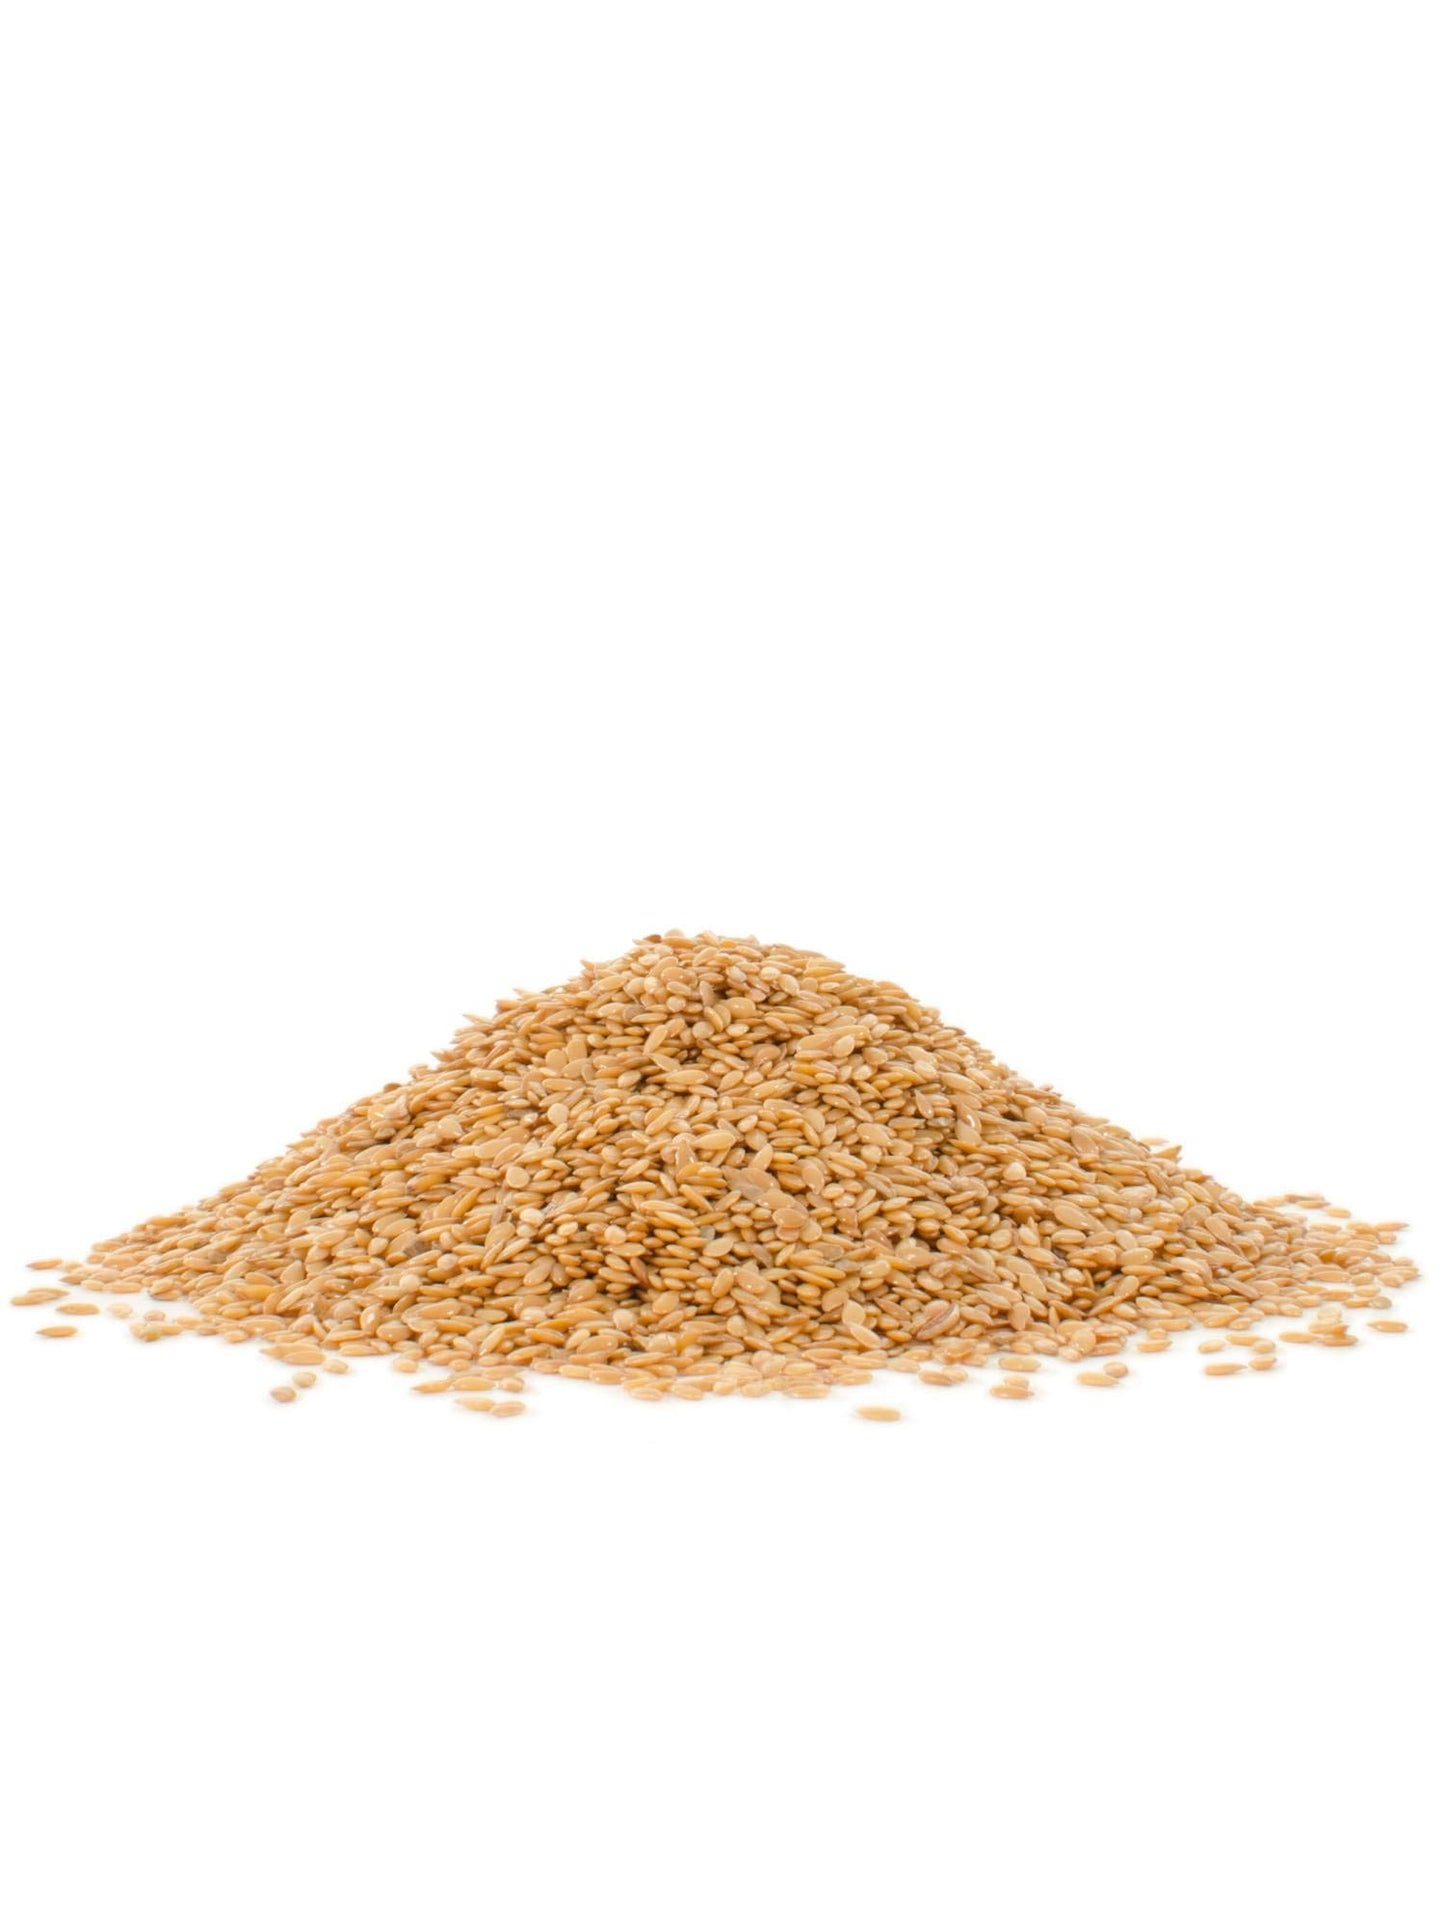 Bobs Red Mill Flaxseed Golden, 13 oz - The Great Shoppe